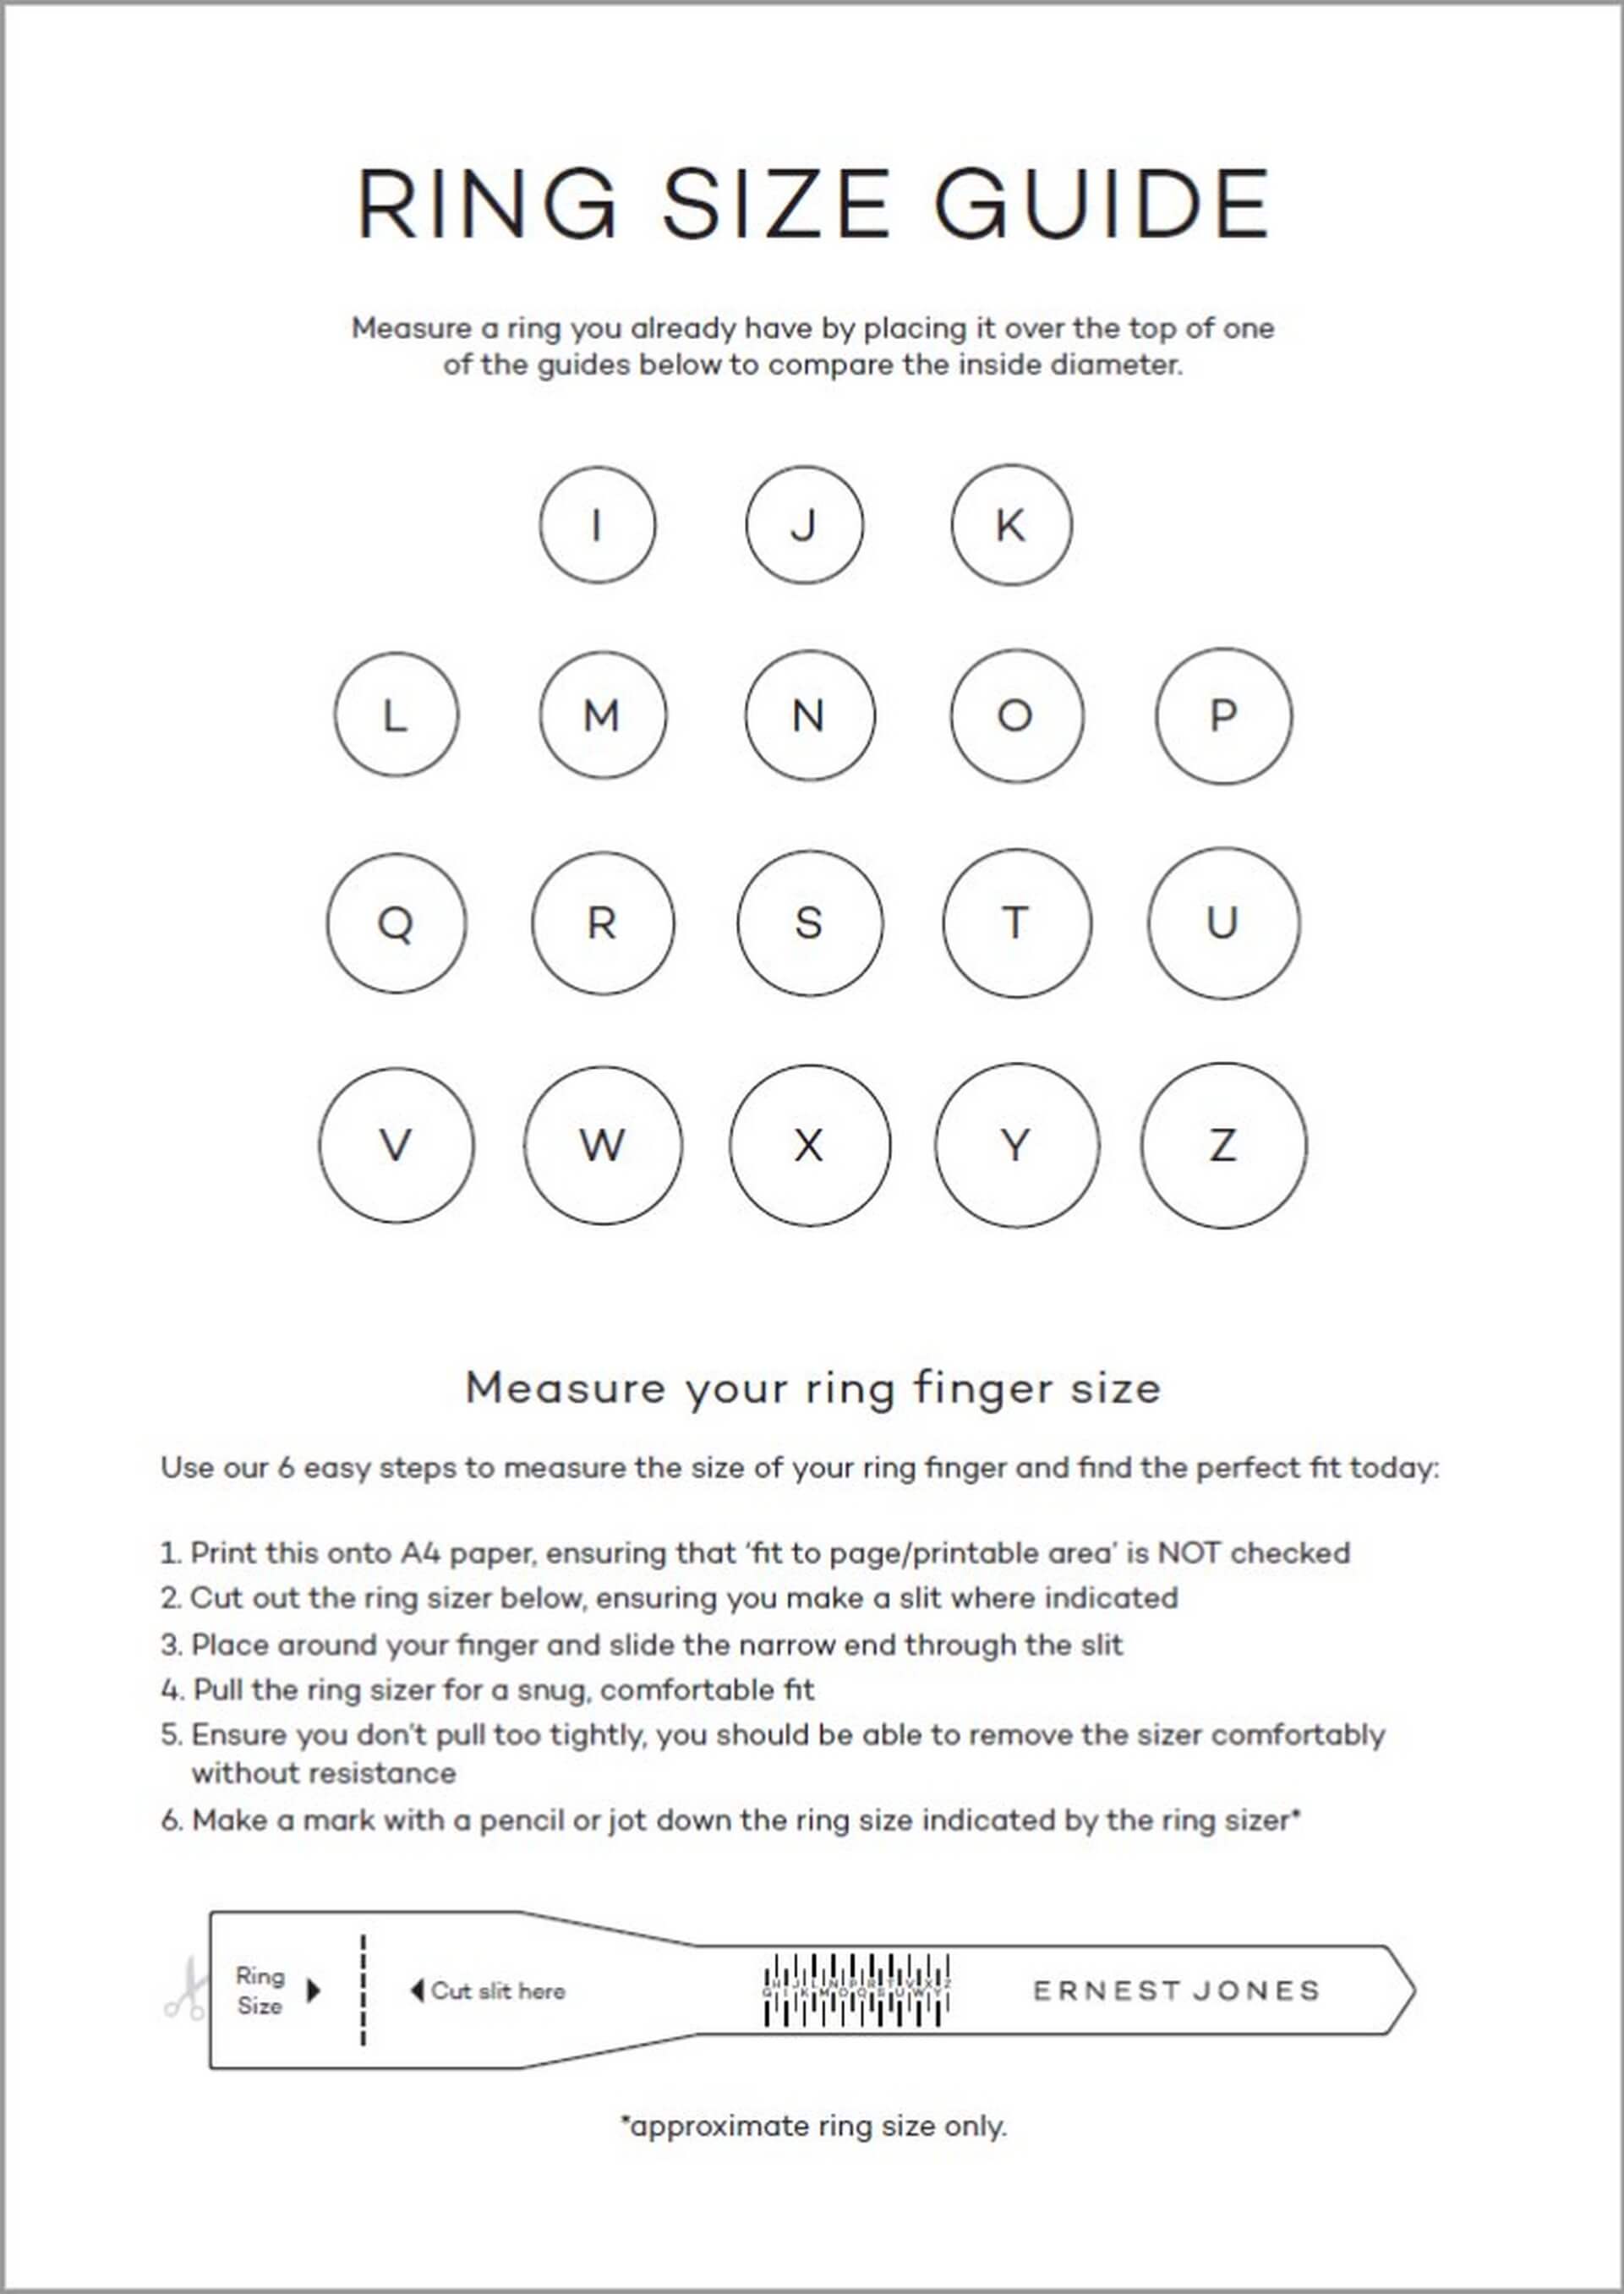 rings%20size%20guide